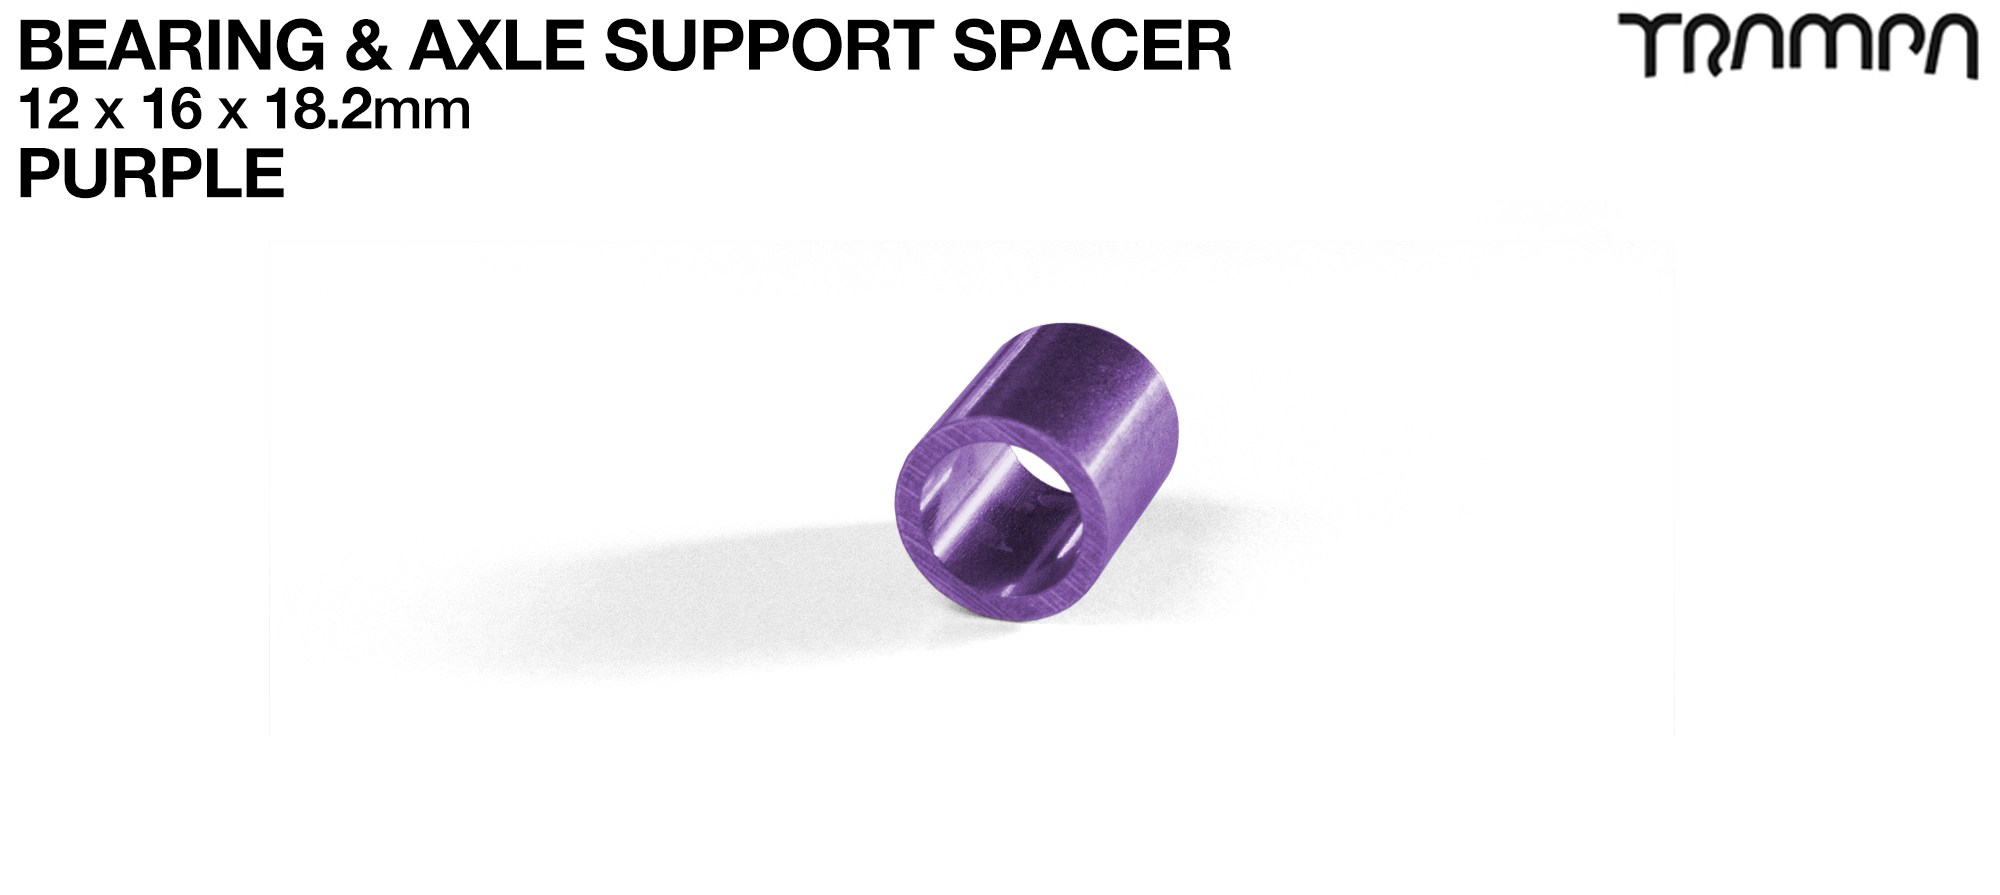 18.2mm Wheel Support Axle Spacers - PURPLE 